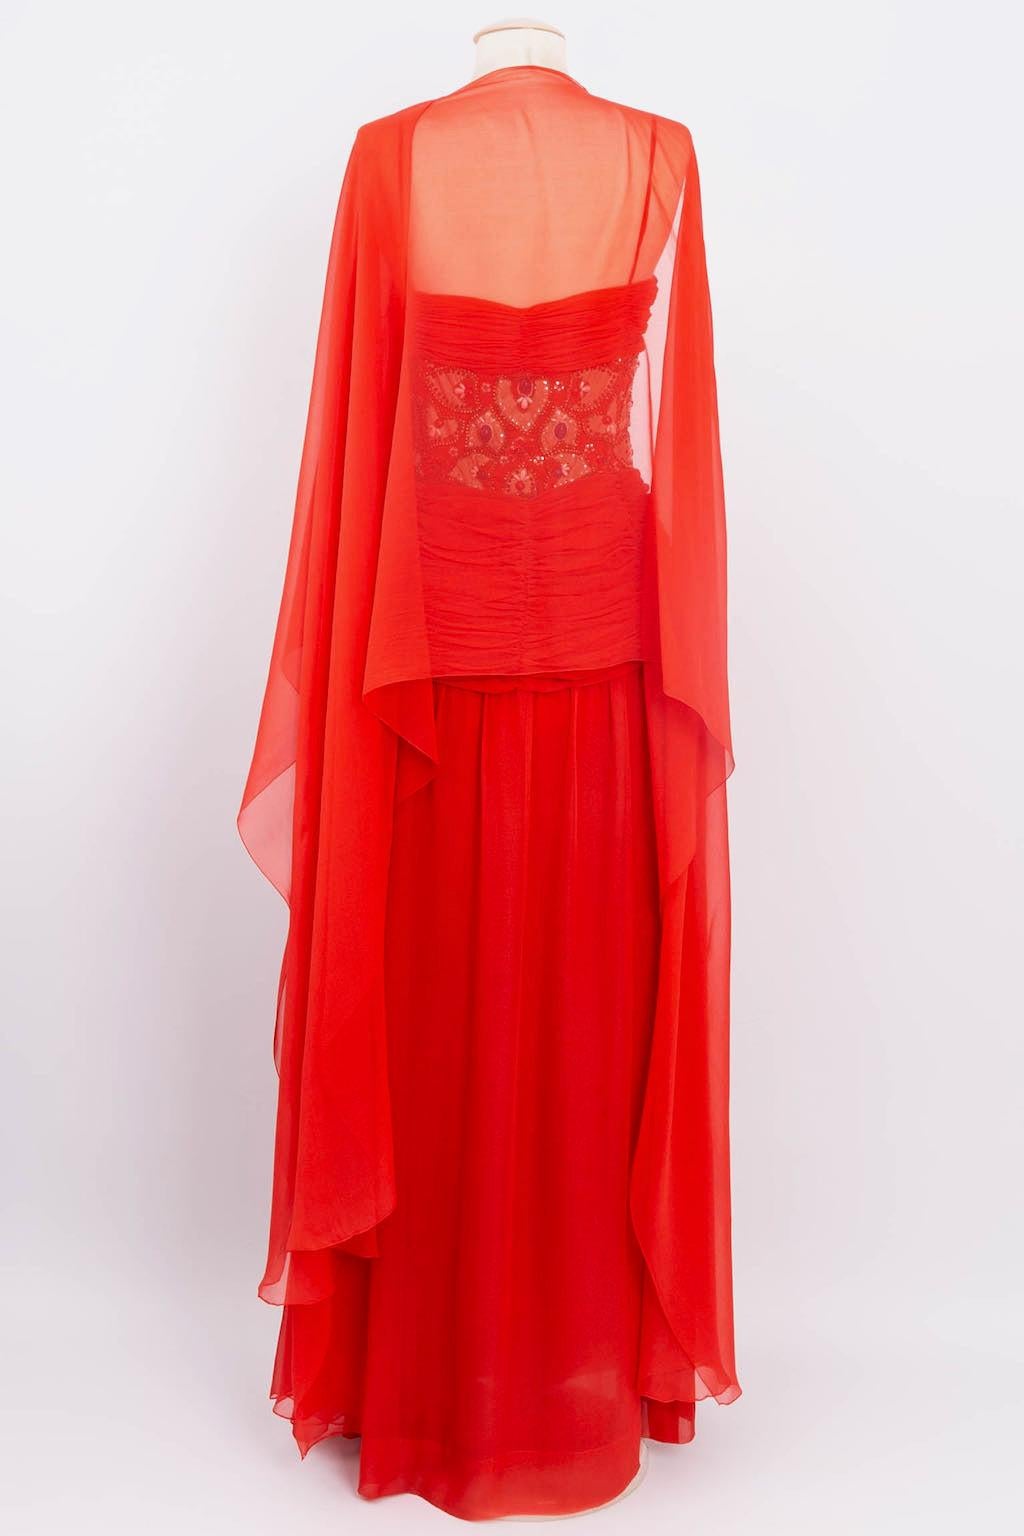 Givenchy Haute Couture Bustier Embroidered Silk Chiffon Dress For Sale 3